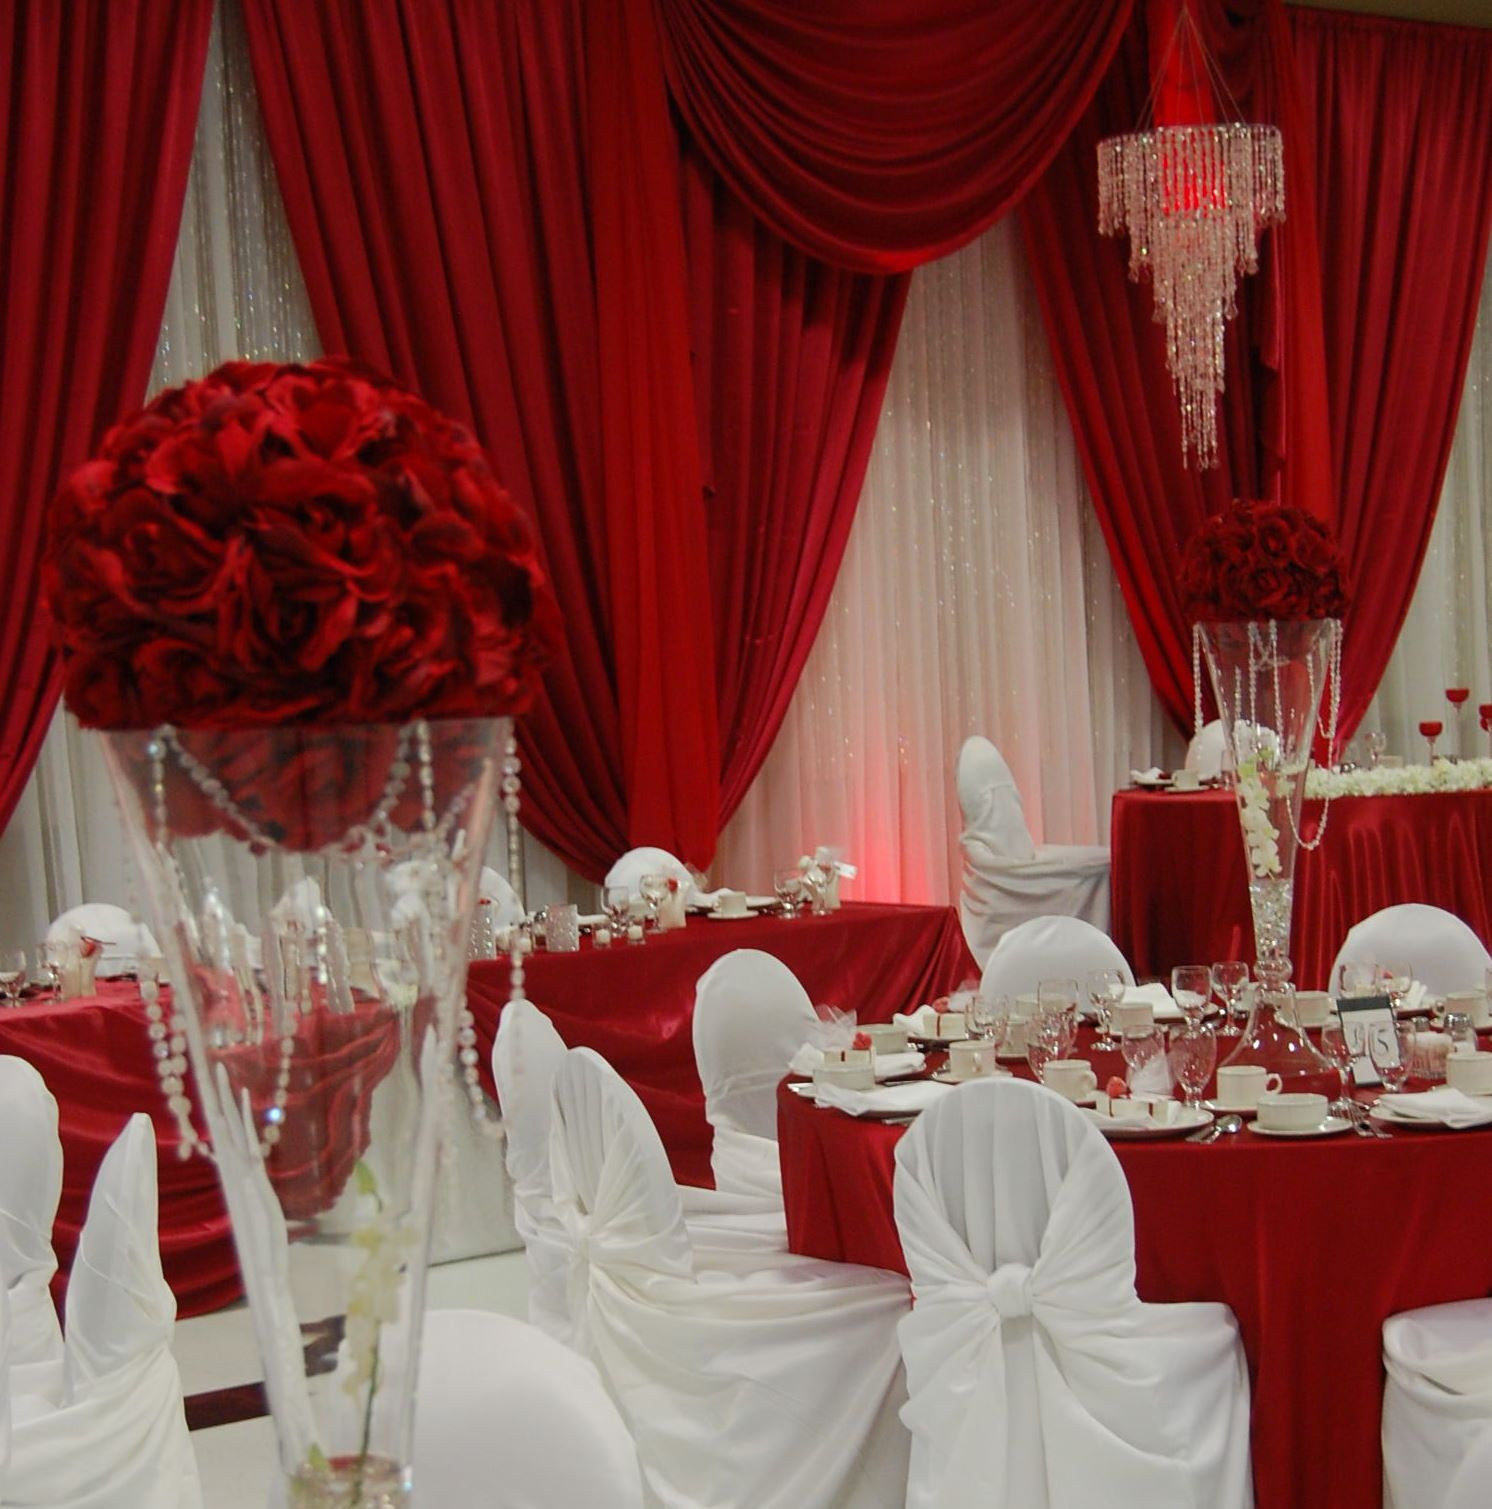 Red And White Wedding Decorations
 oh my never been a fan of red and white weddings but this